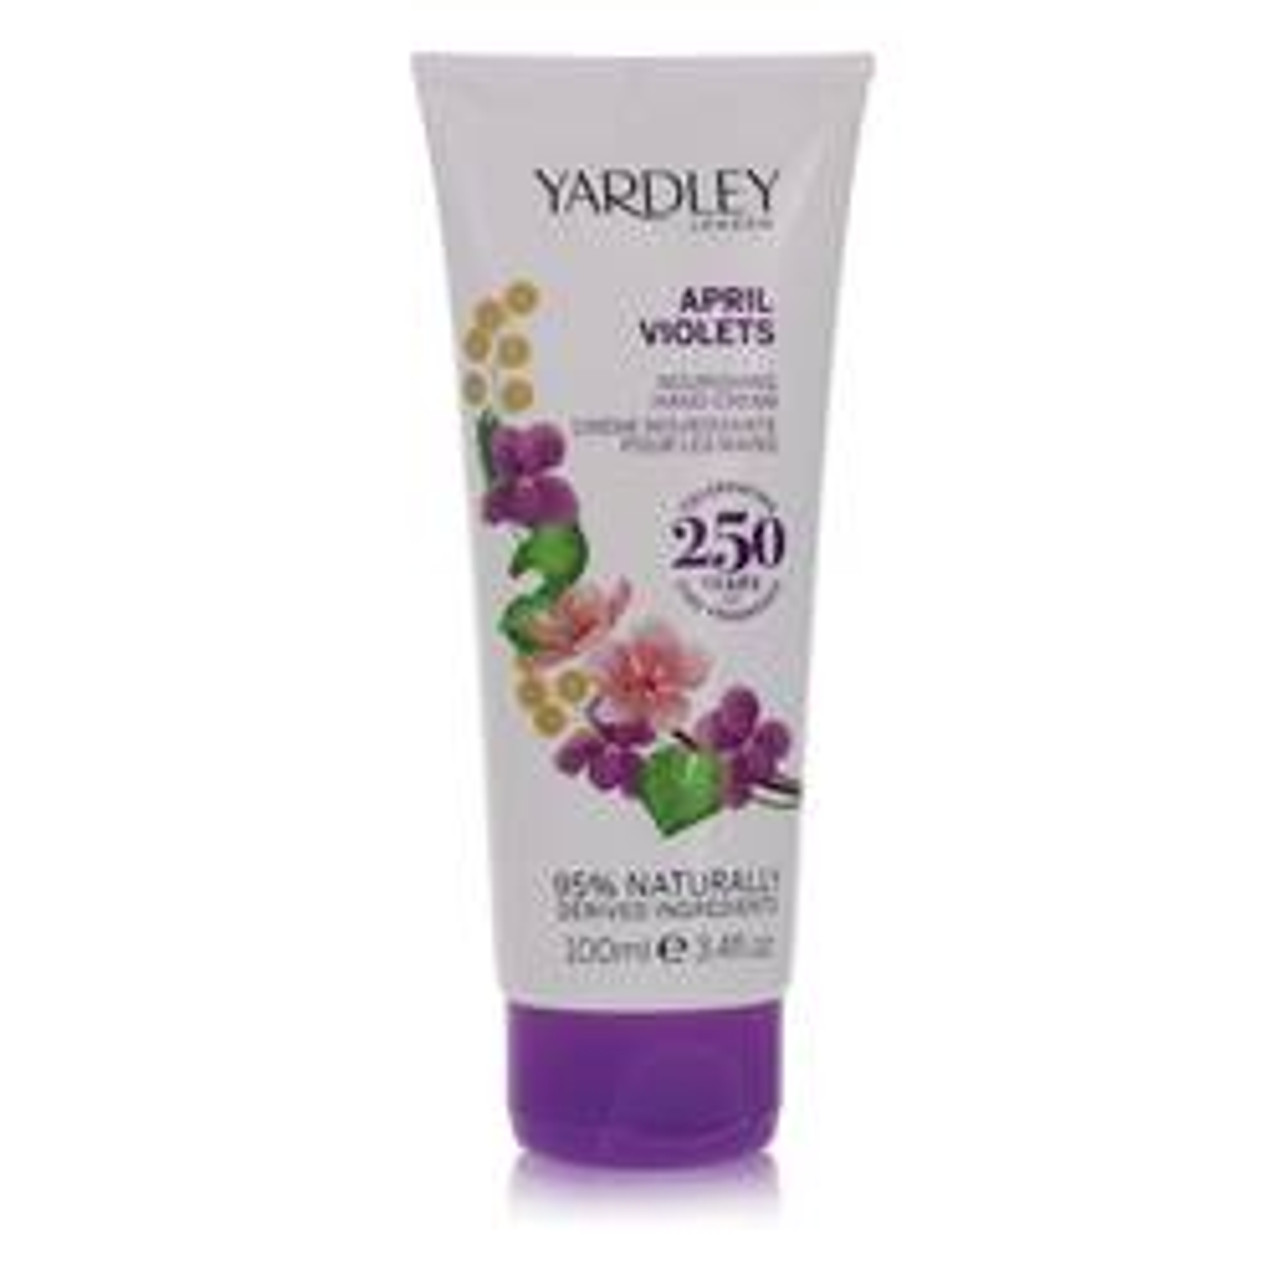 April Violets Perfume By Yardley London Hand Cream 3.4 oz for Women - [From 48.00 - Choose pk Qty ] - *Ships from Miami